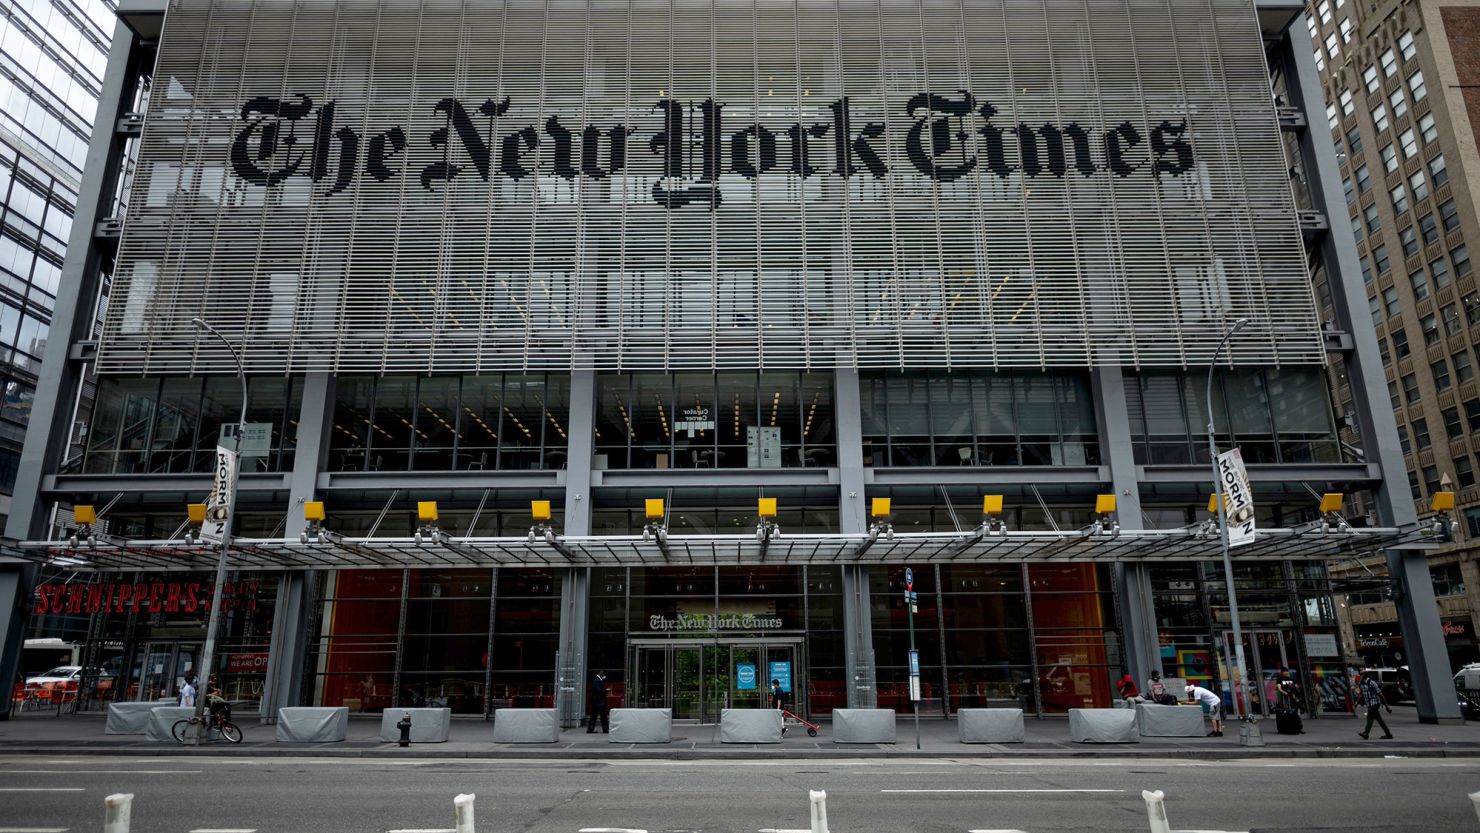 The New York Times building is seen on June 30, 2020 in New York City. The newspaper is contending with a wave of criticism over its coverage of Donald Trump amid the 2024 presidential election.